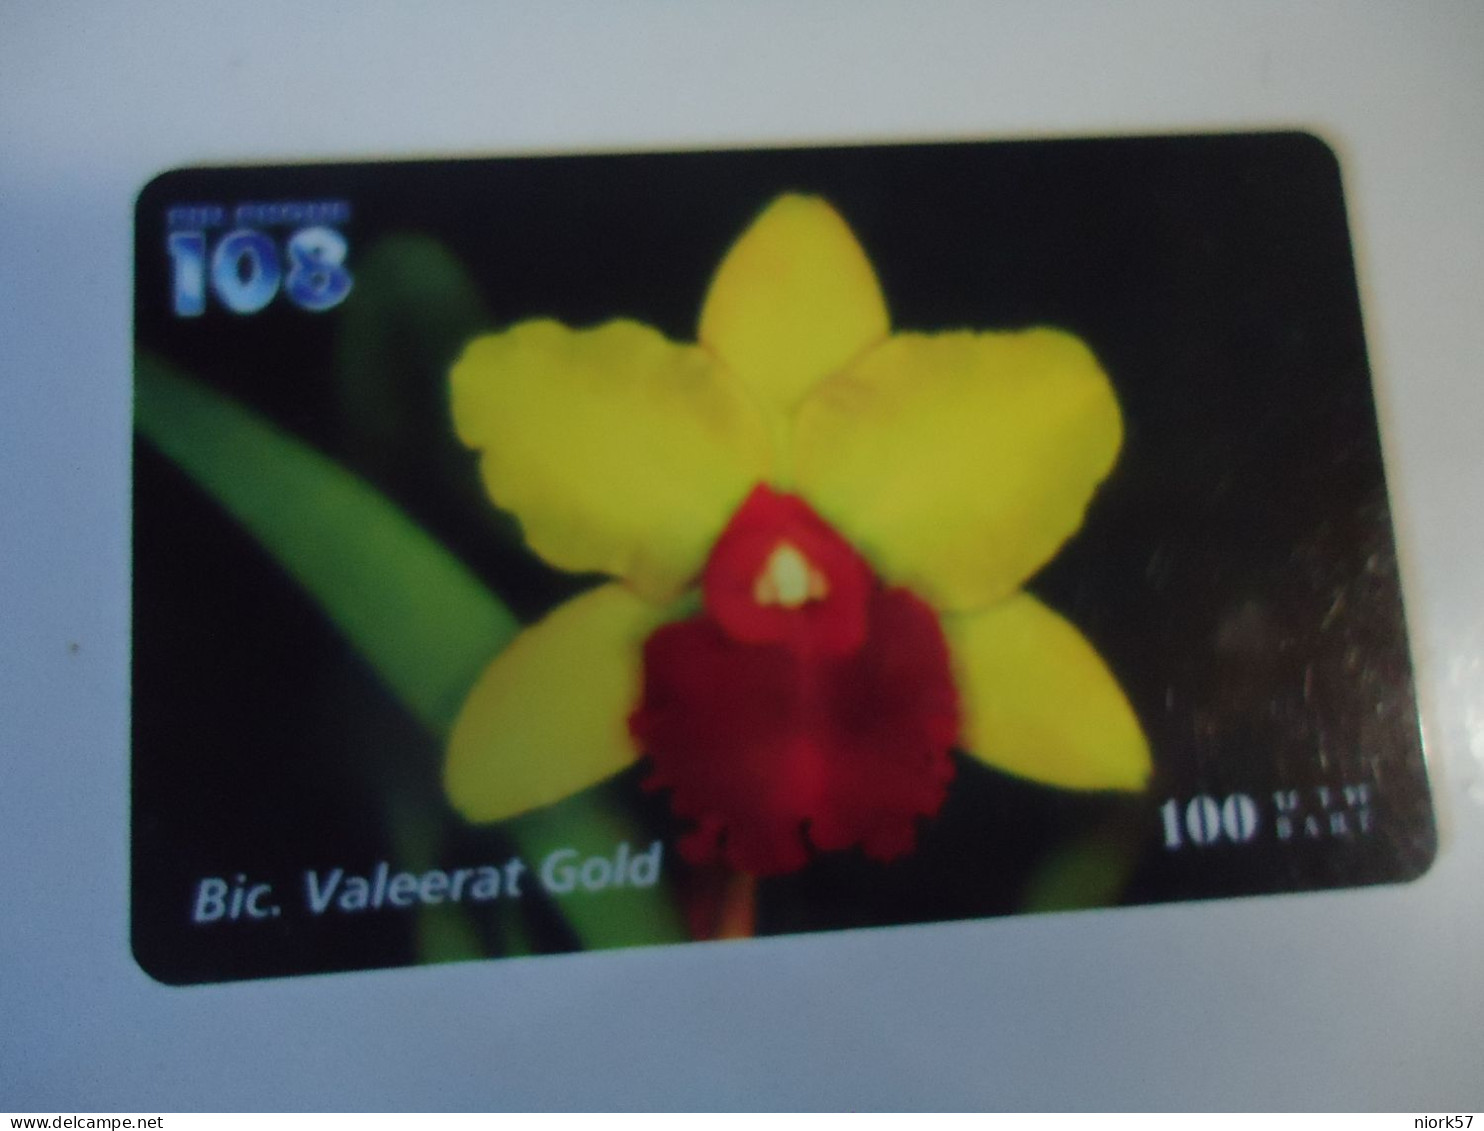 THAILAND USED   CARDS PIN 108  FLOWERS ORCHIDS - Blumen